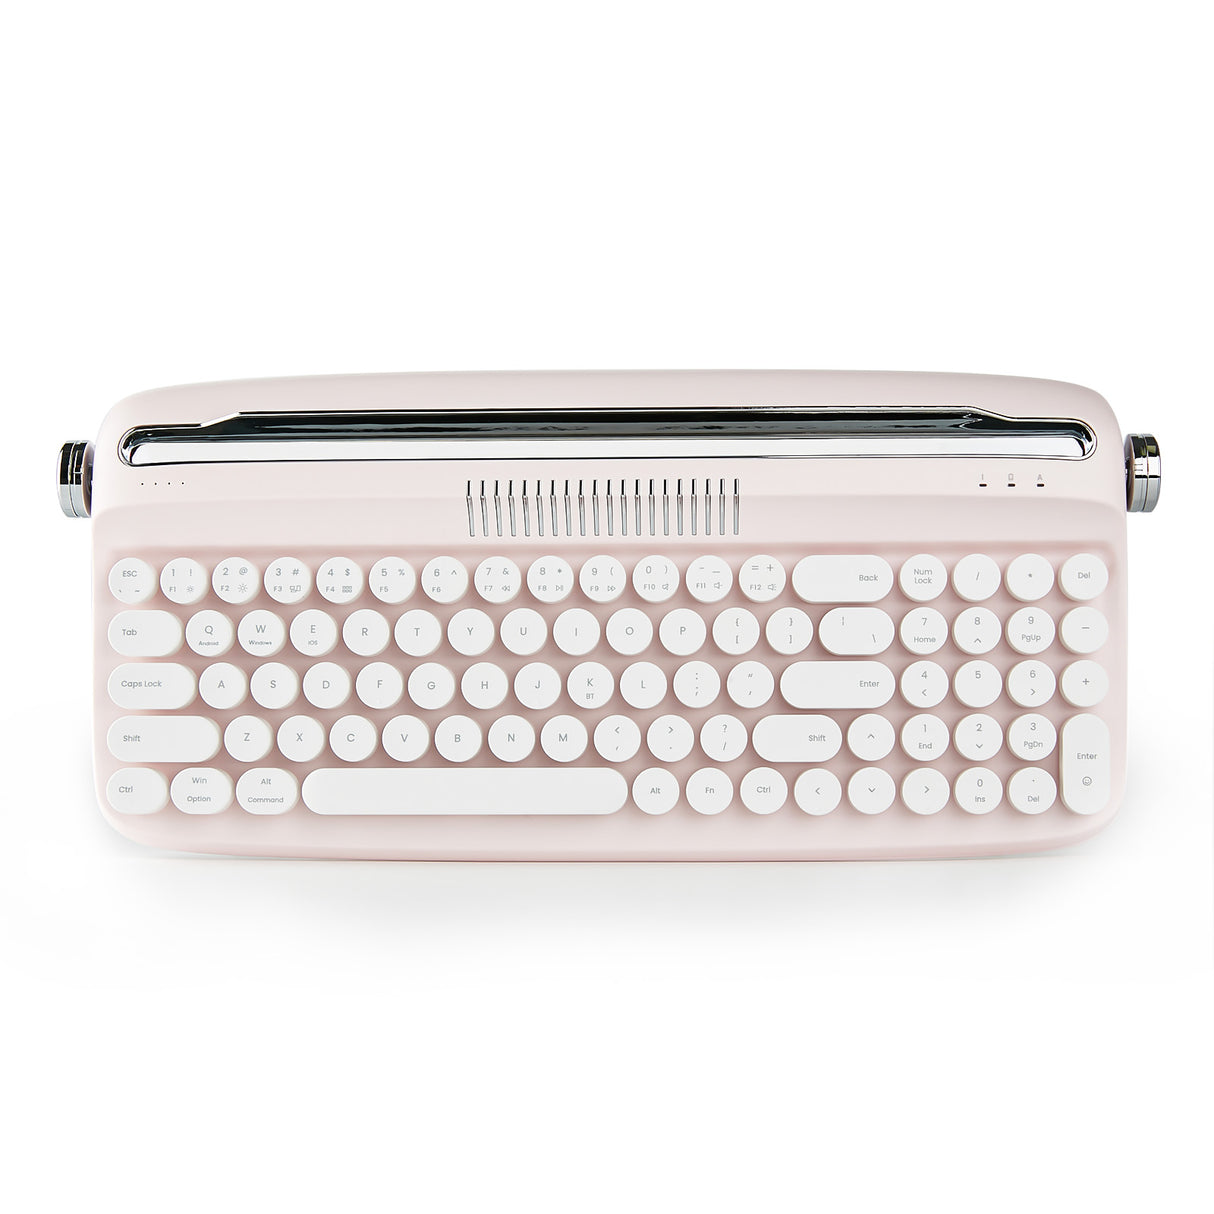 YUNZII ACTTO B309 Baby Pink Upgraded Rechargeable Wireless Retro Typewriter Keyboard